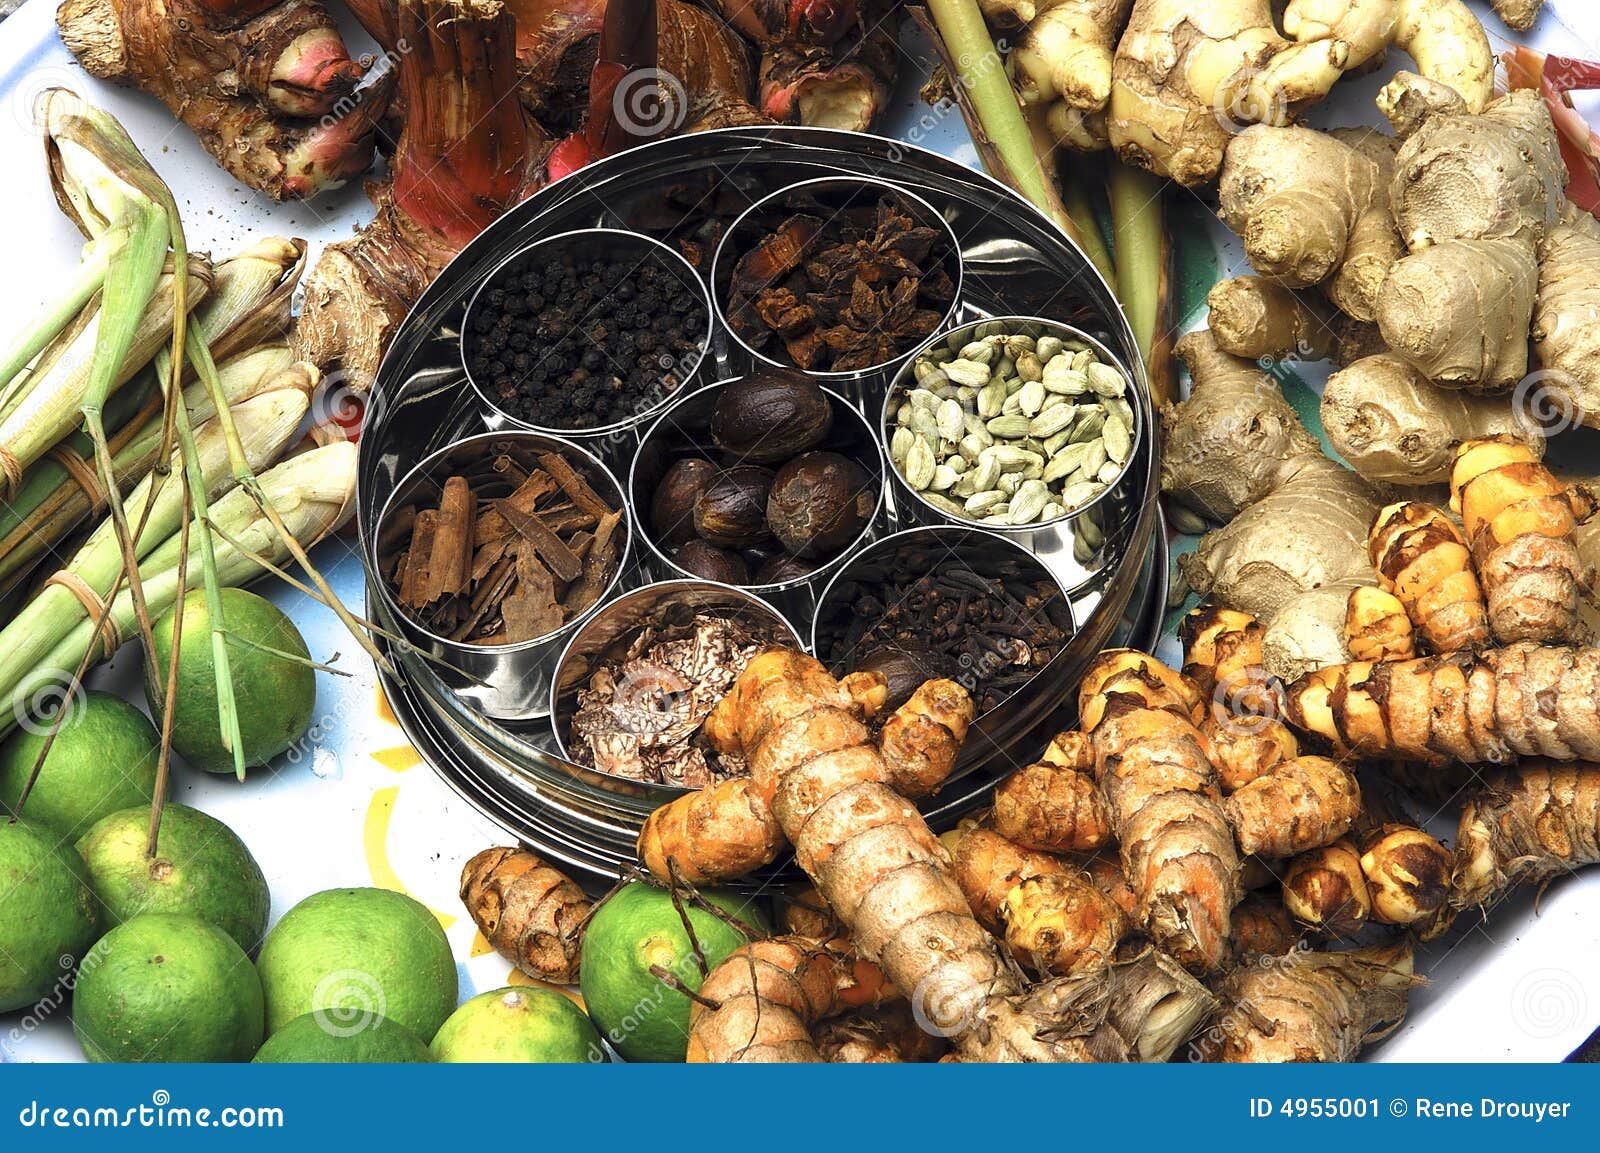 malaysia, penang: spices